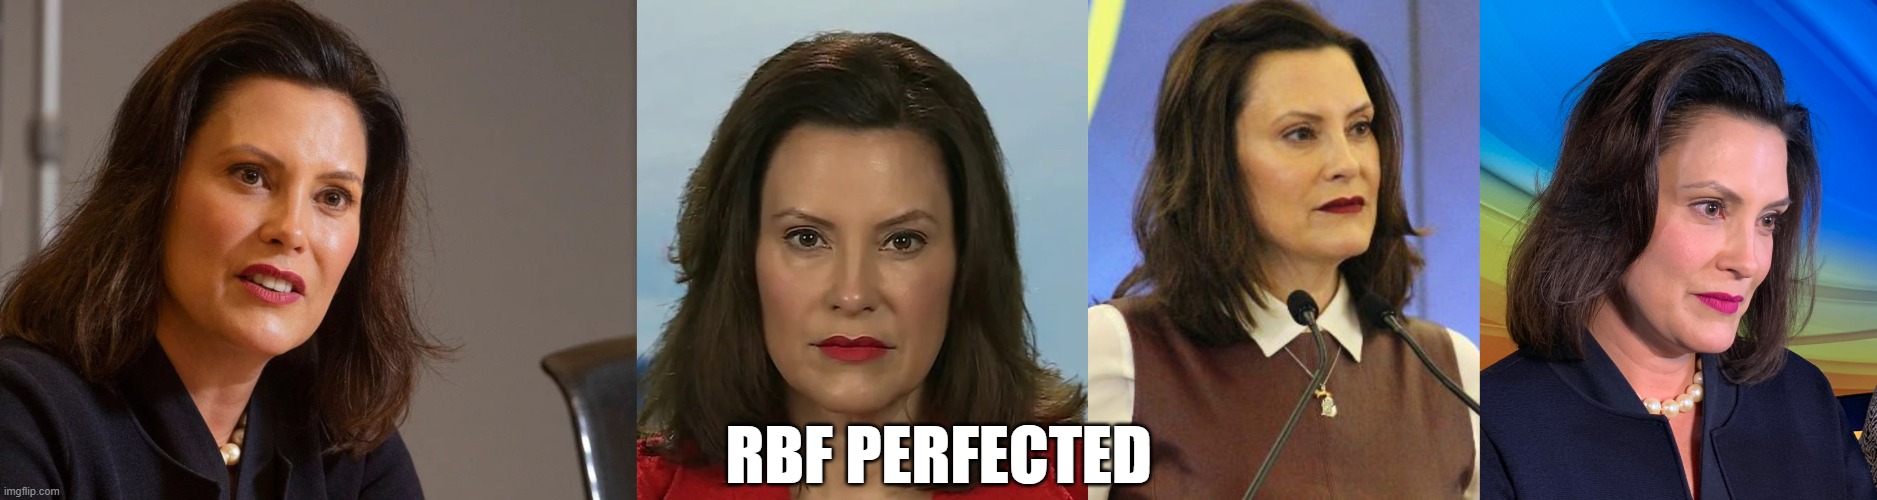 RBF PERFECTED | image tagged in gretchen whitmer governor of michigan,gretchen whitmer michigan governor,democrat michigan governor gretchen whitmer,governor wh | made w/ Imgflip meme maker